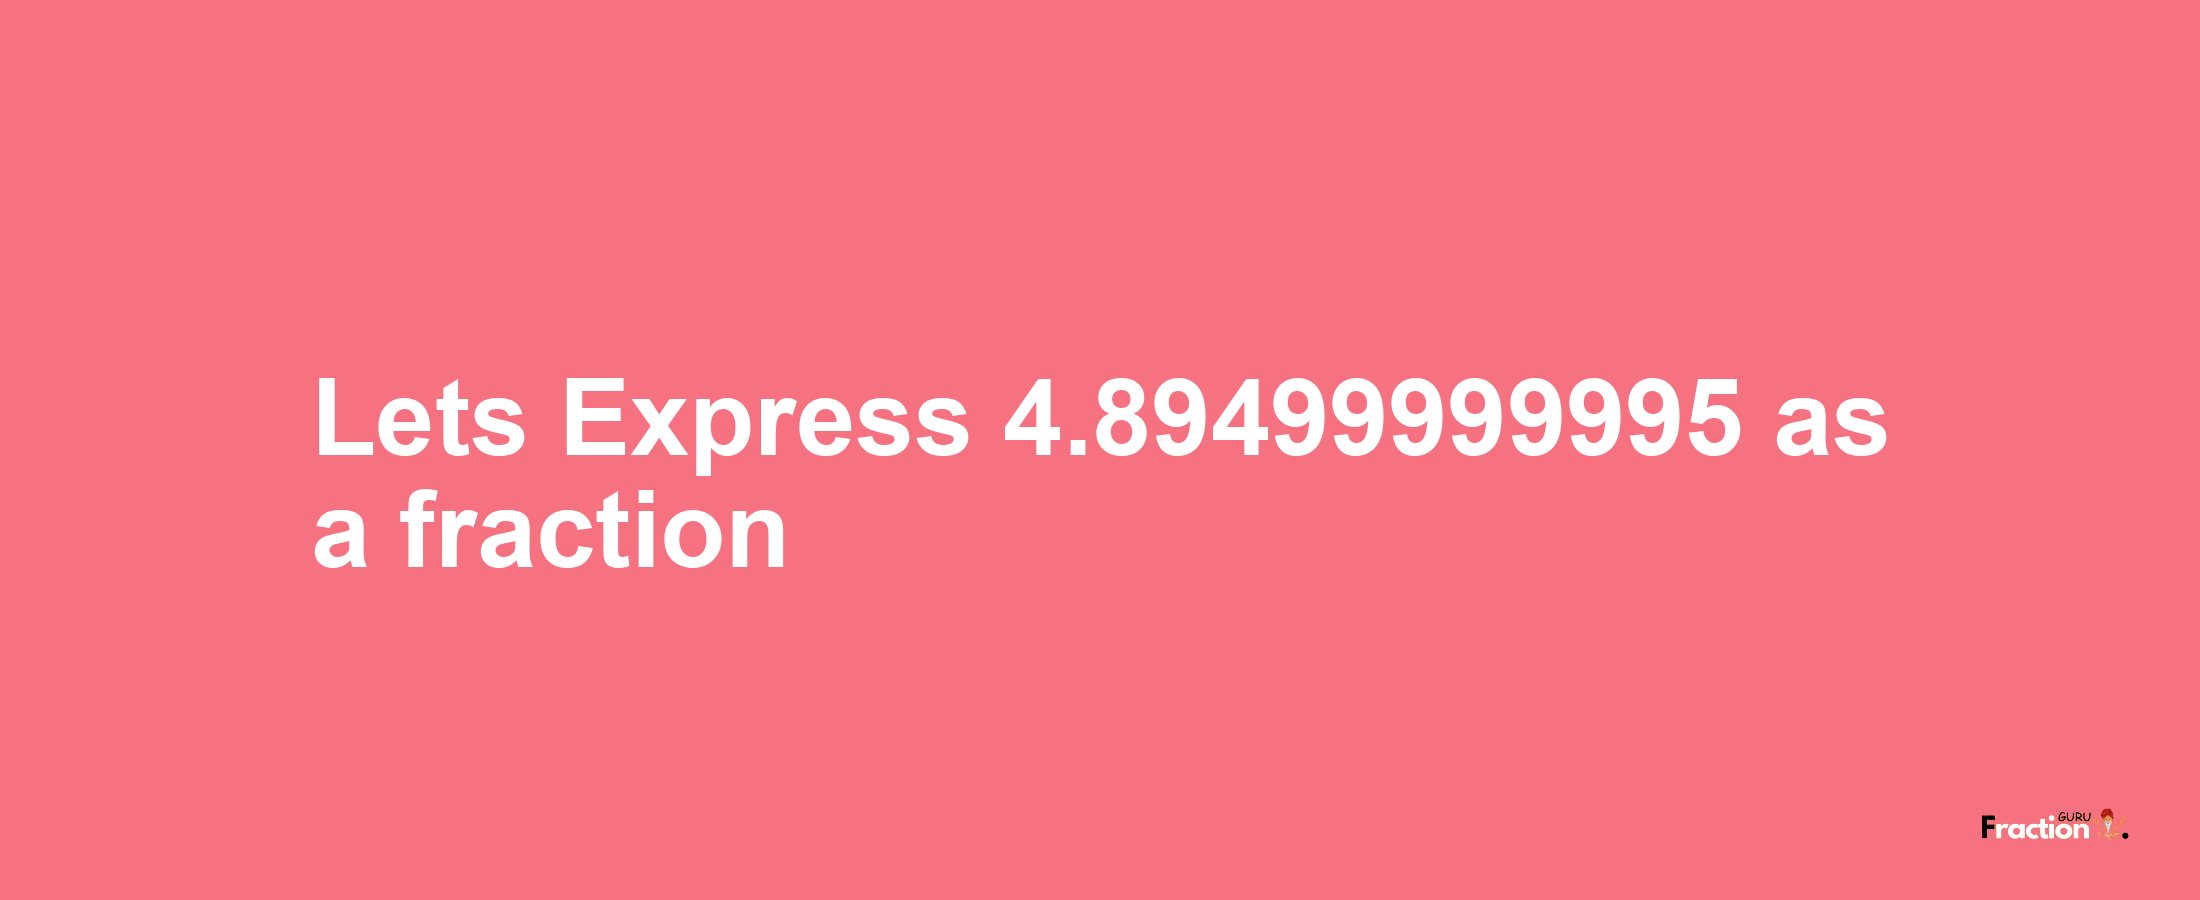 Lets Express 4.89499999995 as afraction